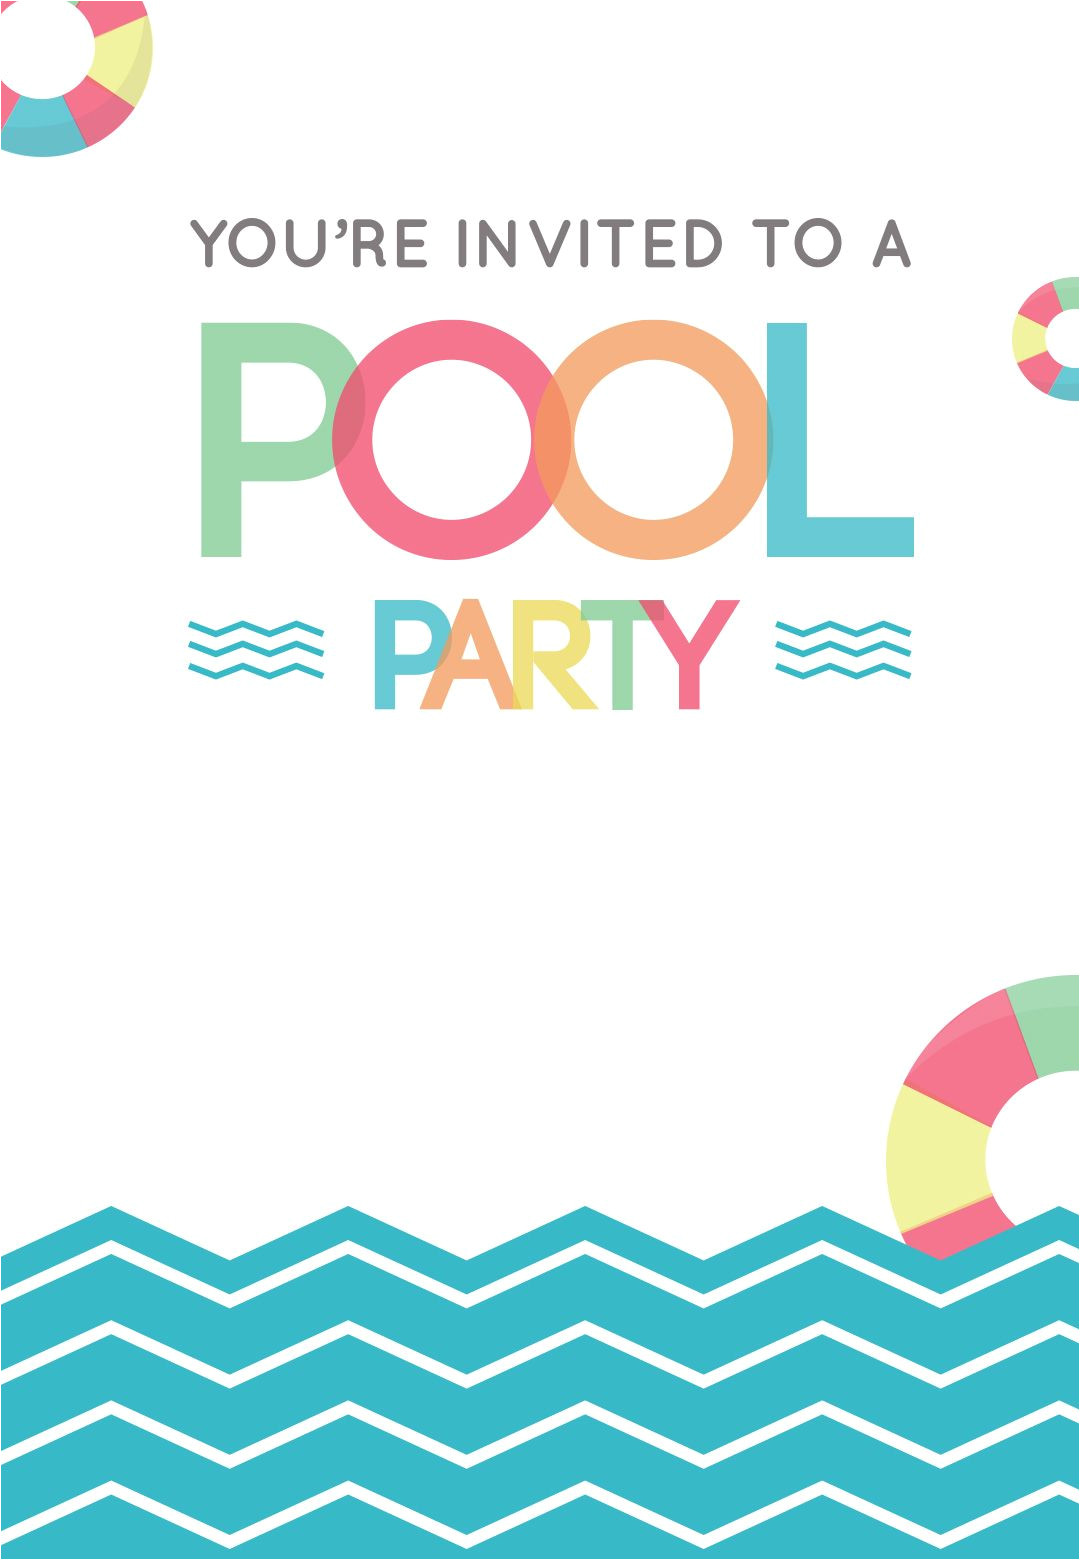 Free Printable Party Invitation Templates Greetings island Fun afternoon Free Printable Summer Party Invitation